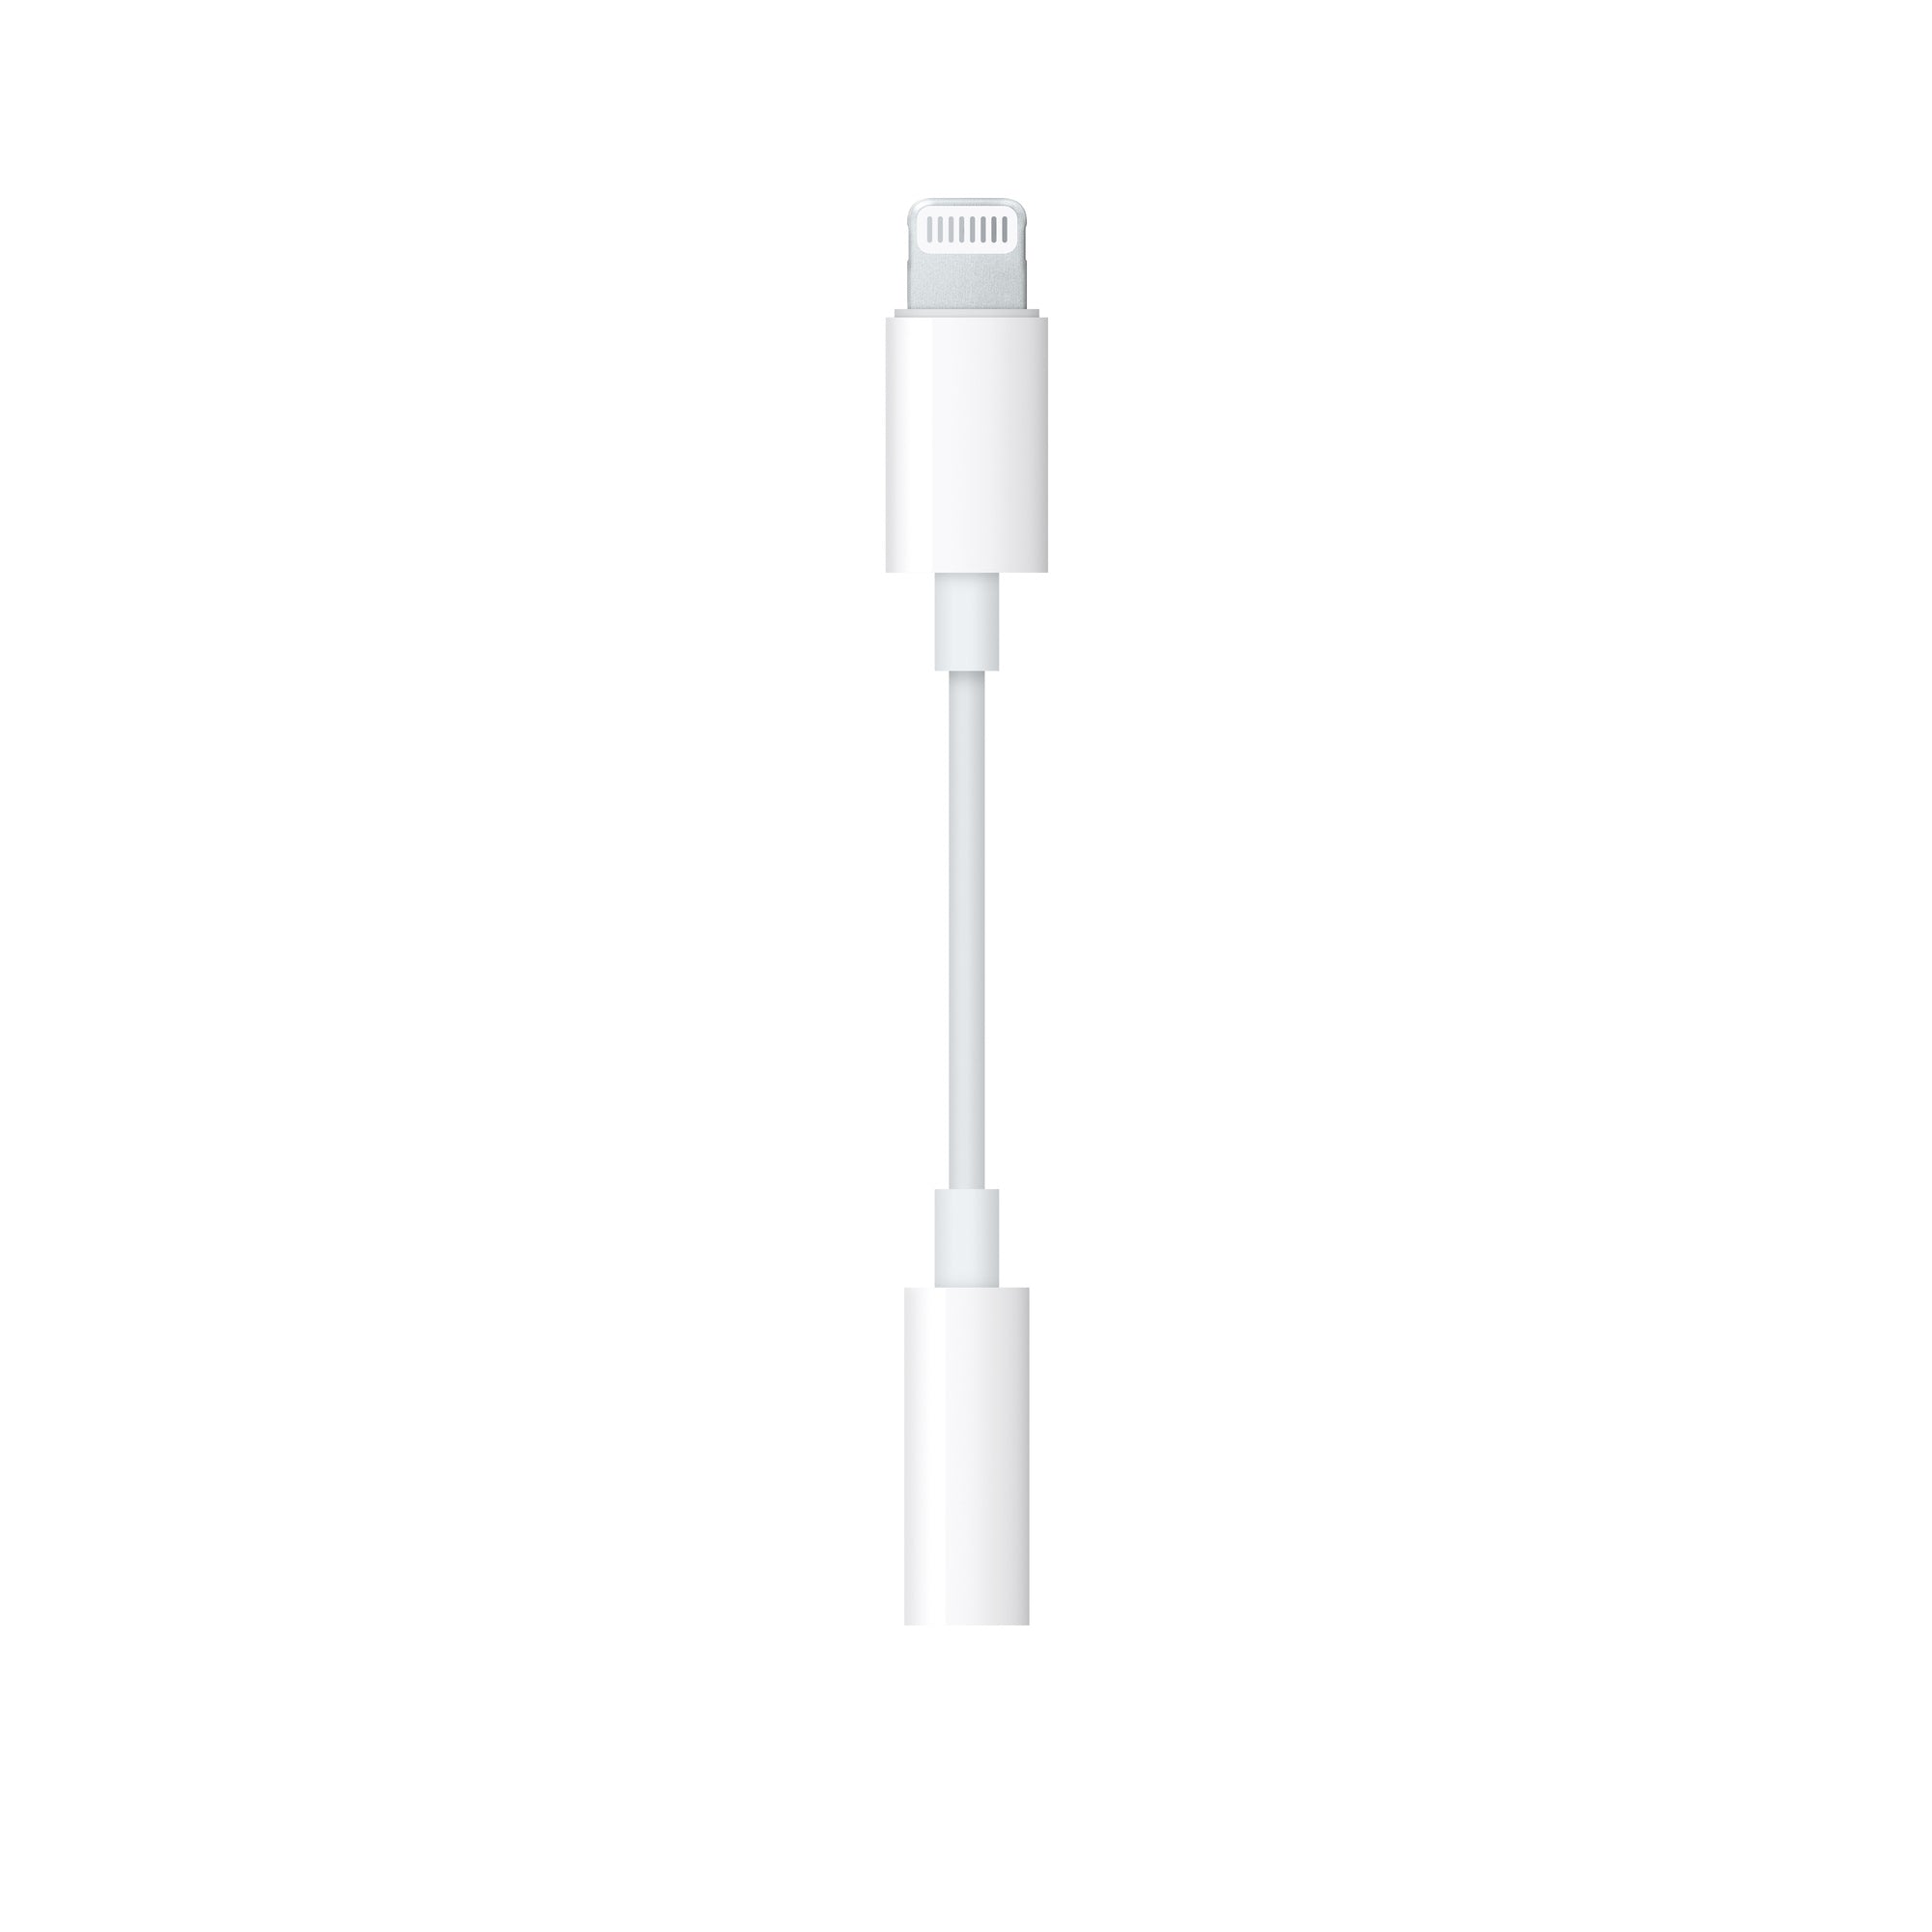 Apple iPhone 5C Heaphone Jack Connector (Lightning to 3.5mm)